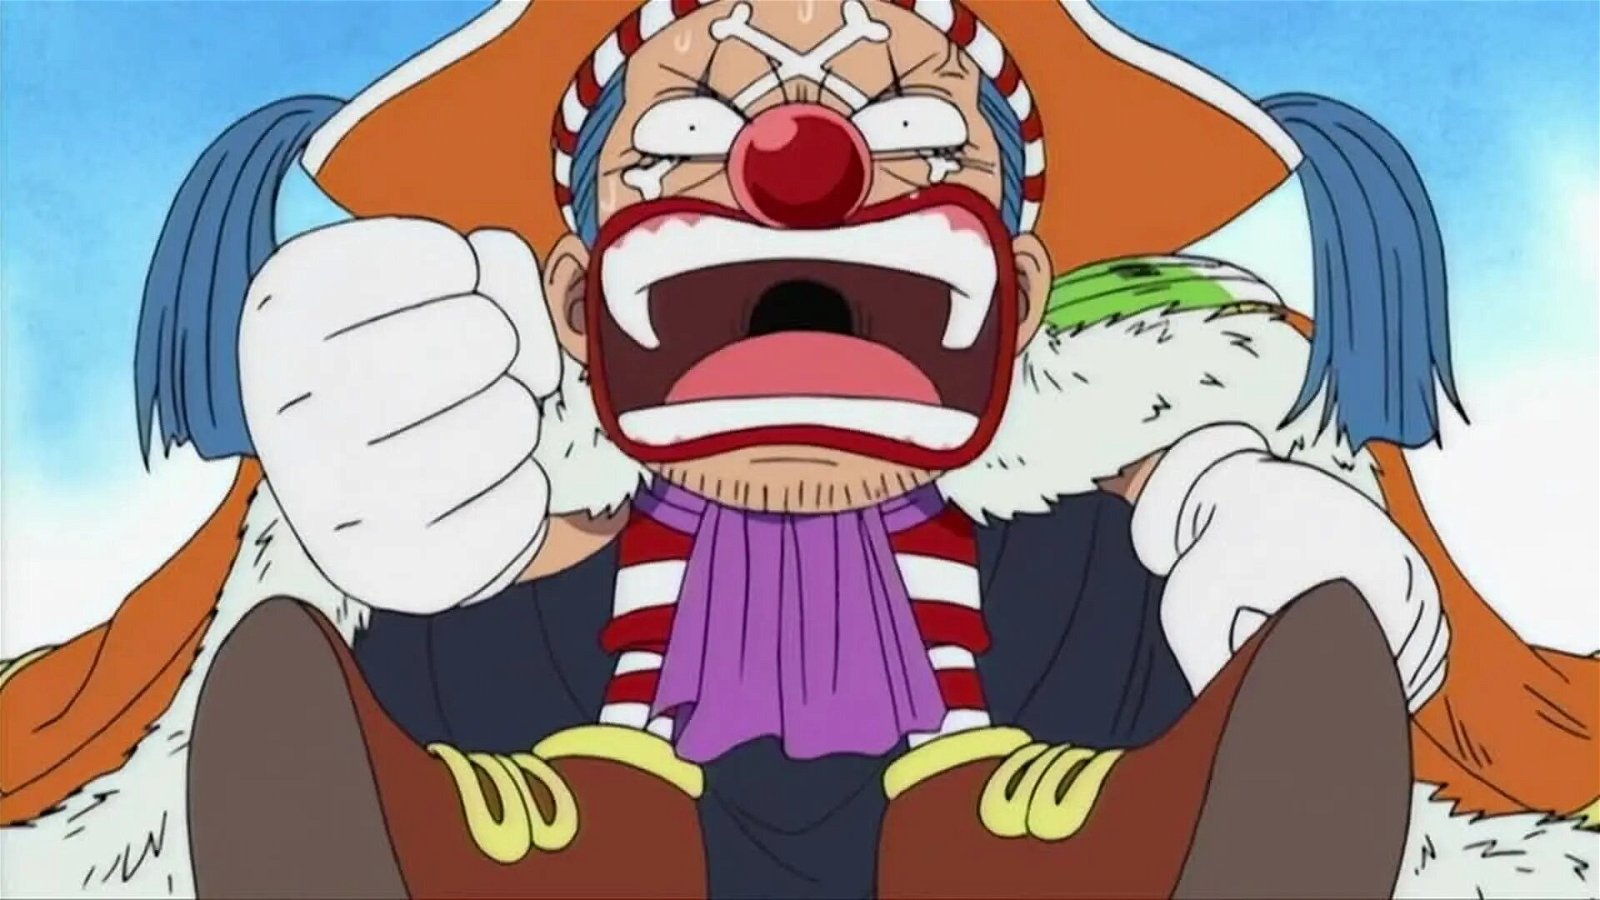 This One Piece villain has broken each and every one of the rules of the series